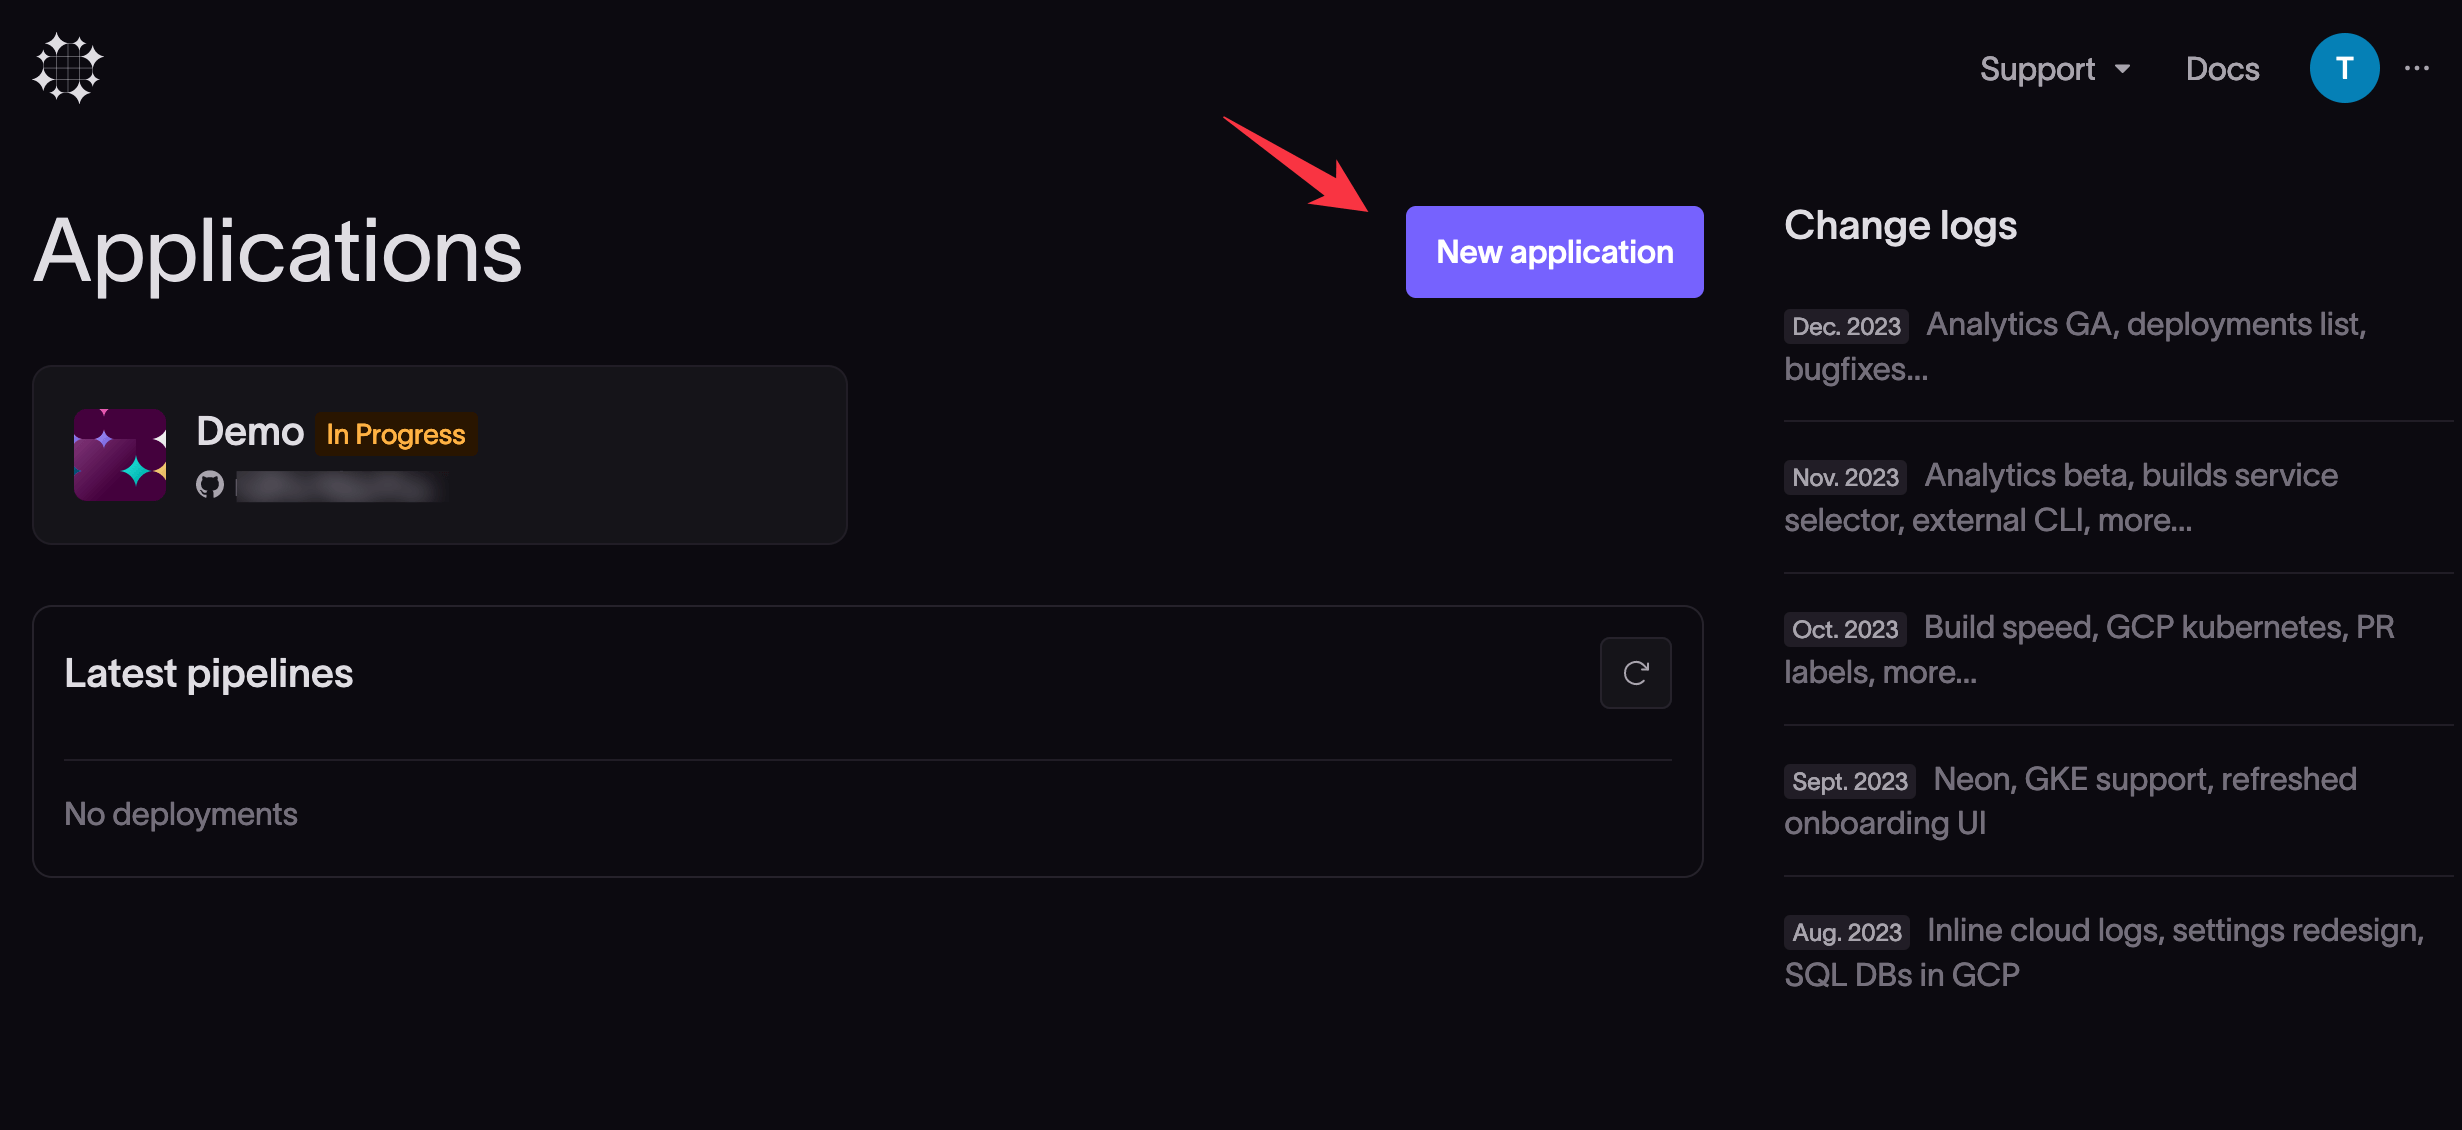 New application button